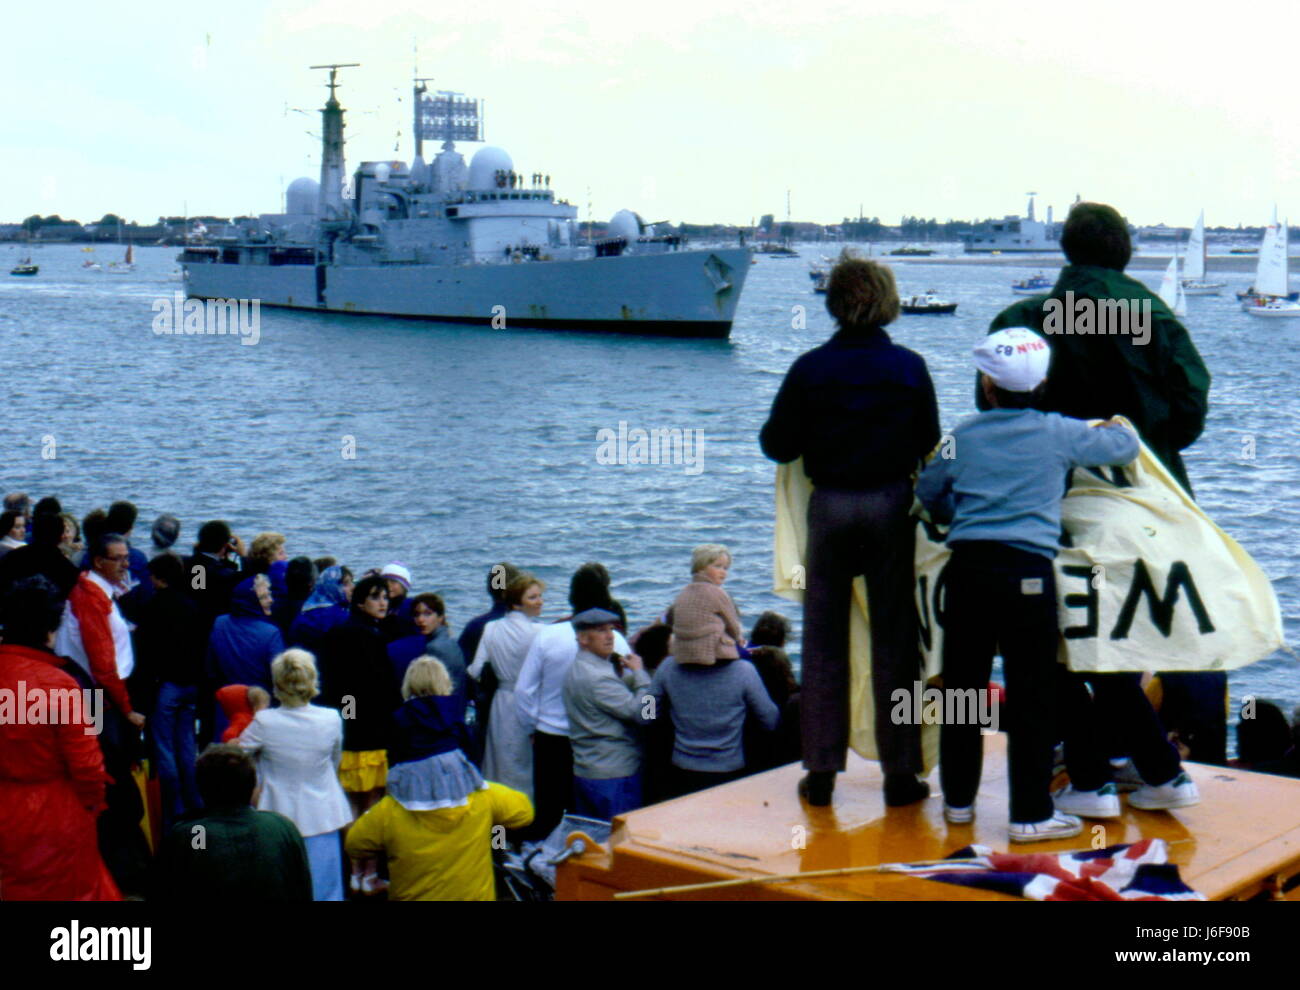 AJAXNETPHOTO. 19TH JUNE. 1982. PORTSMOUTH, ENGLAND. - SURVIVOR RETURNS - THE TYPE 42 (1&2) SHEFFIELD CLASS DESTROYER (3660 TONS) HMS GLASGOW, A PATCH IN HER HULL VISIBLE WHERE AN ARGENTINE BOMB ENTERED THE HULL, RETURNS HOME TO CROWDS OF WELL-WISHERS GATHERED ON FOUNTAIN LAKE JETTY.  PHOTO:JONATHAN EASTLAND/AJAX. REF:910168 Stock Photo